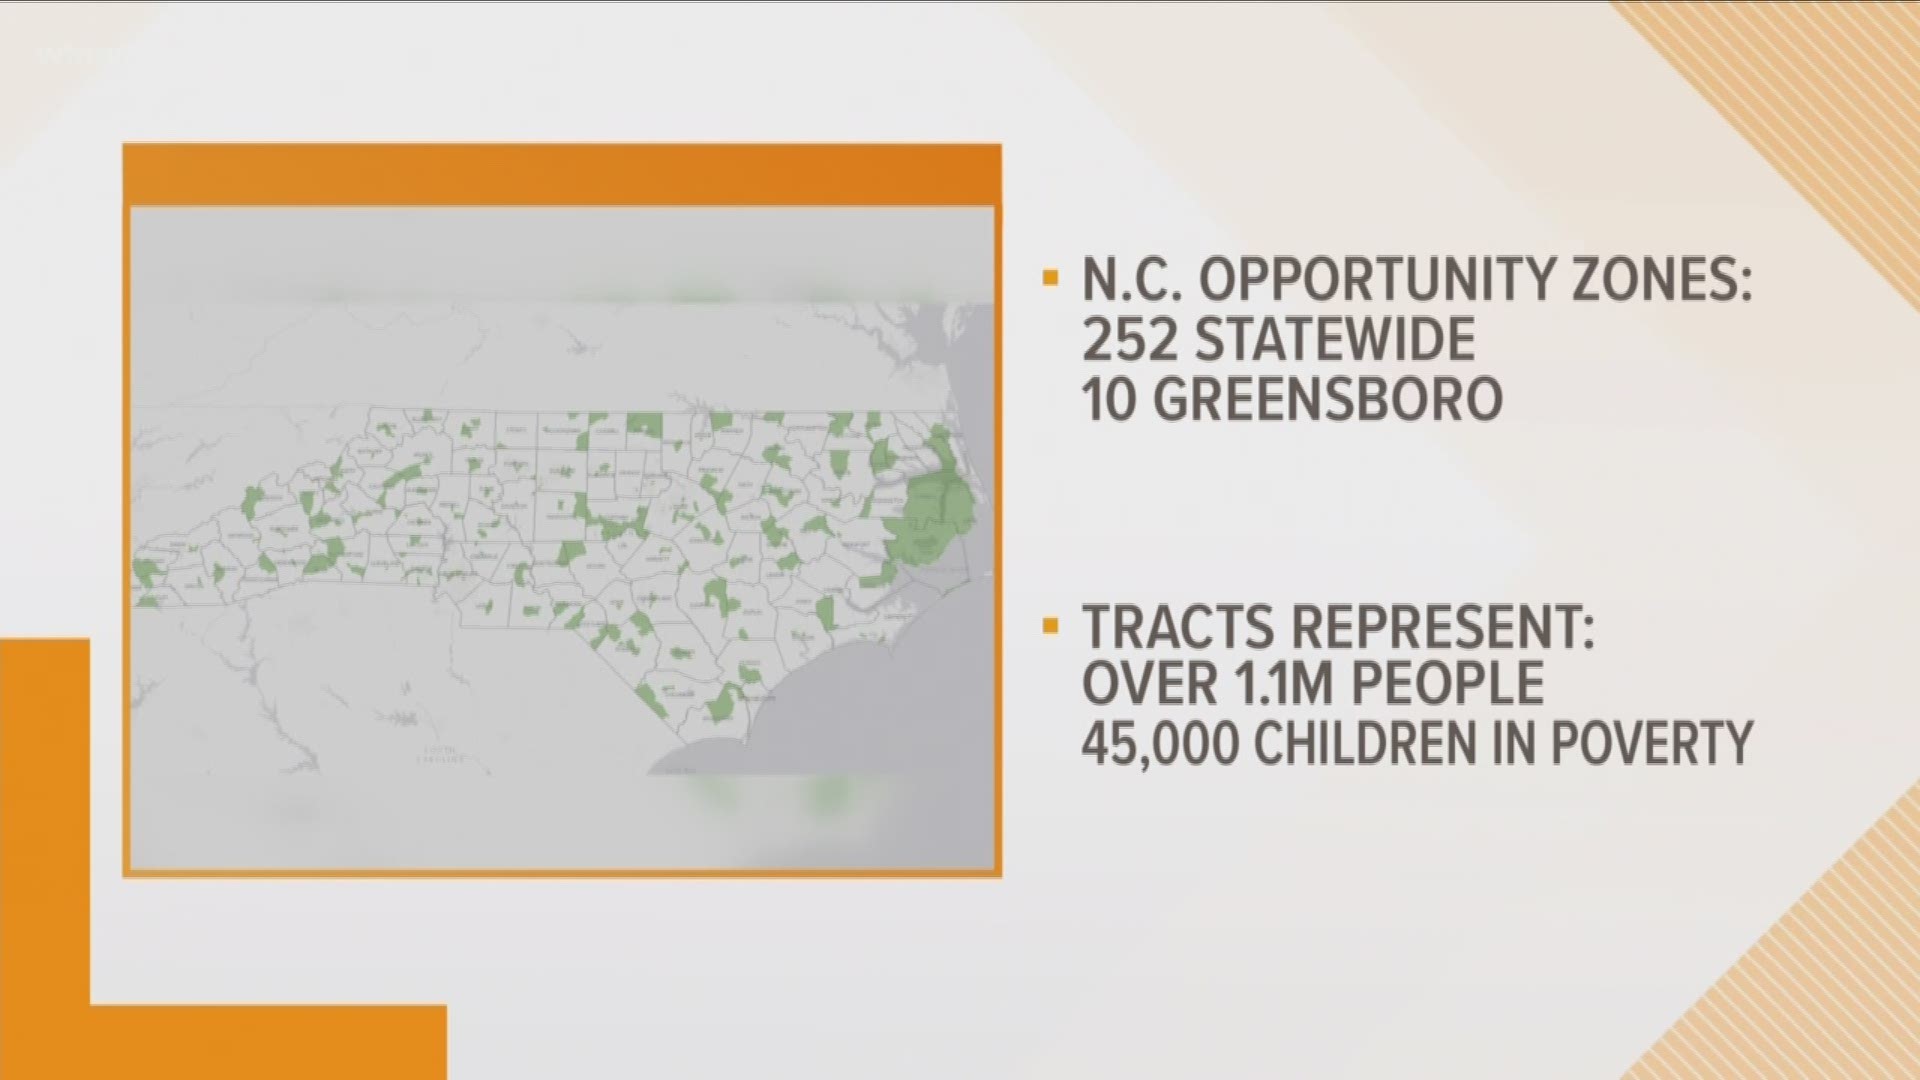 The City of Greensboro has a total of 10 sites labeled as Opportunity Zones. It’s a federal economic development program that encourages long-term investment in low-income urban and rural communities.